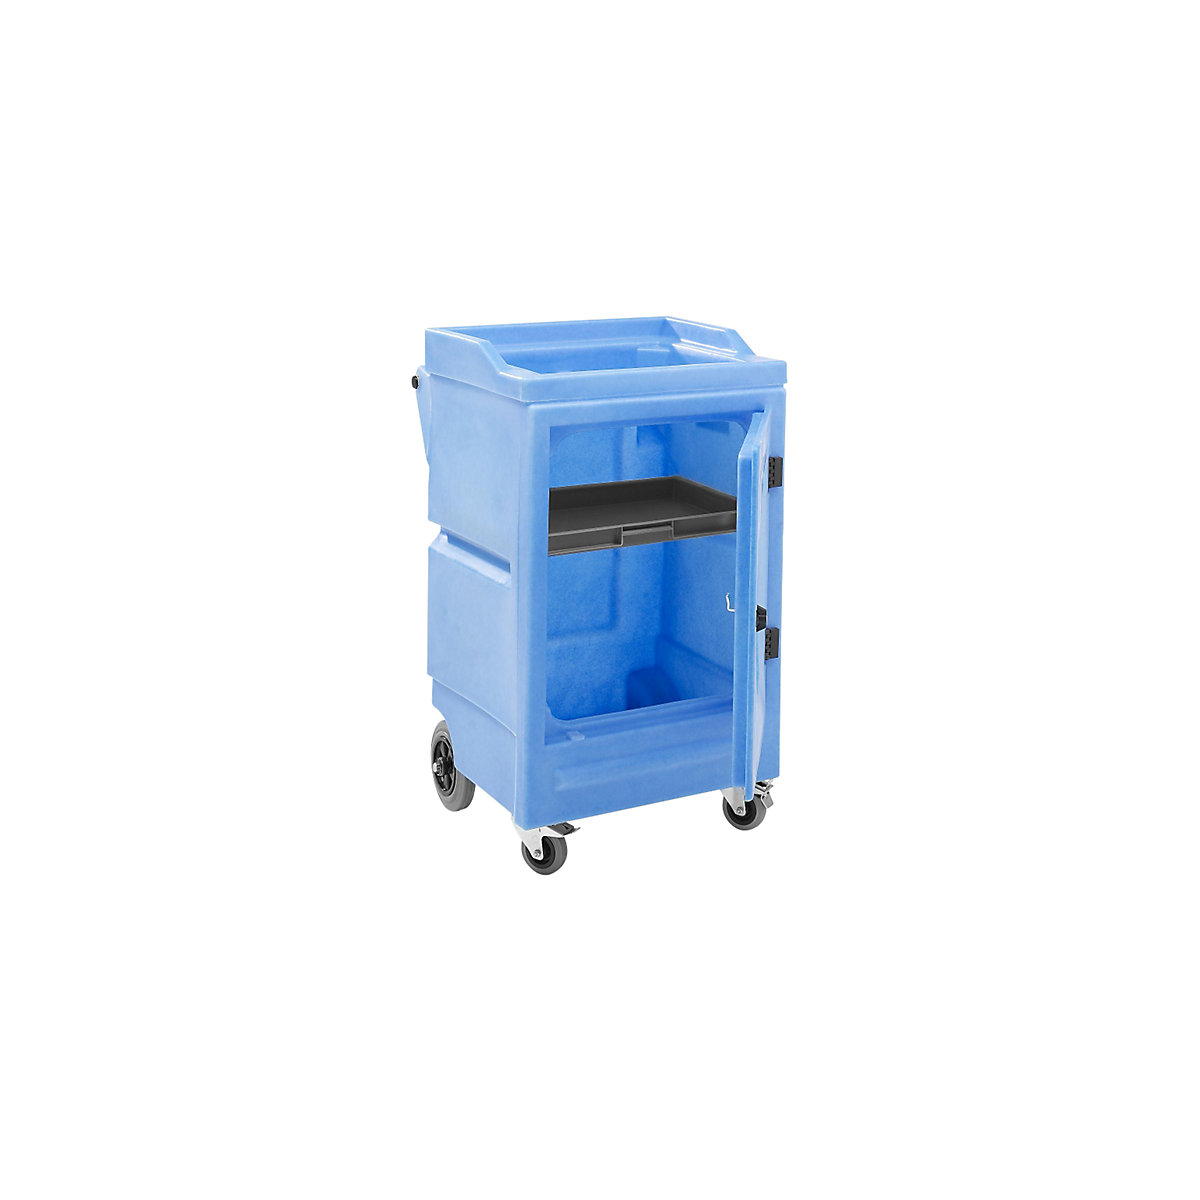 Environmental/chemical trolley made of PE